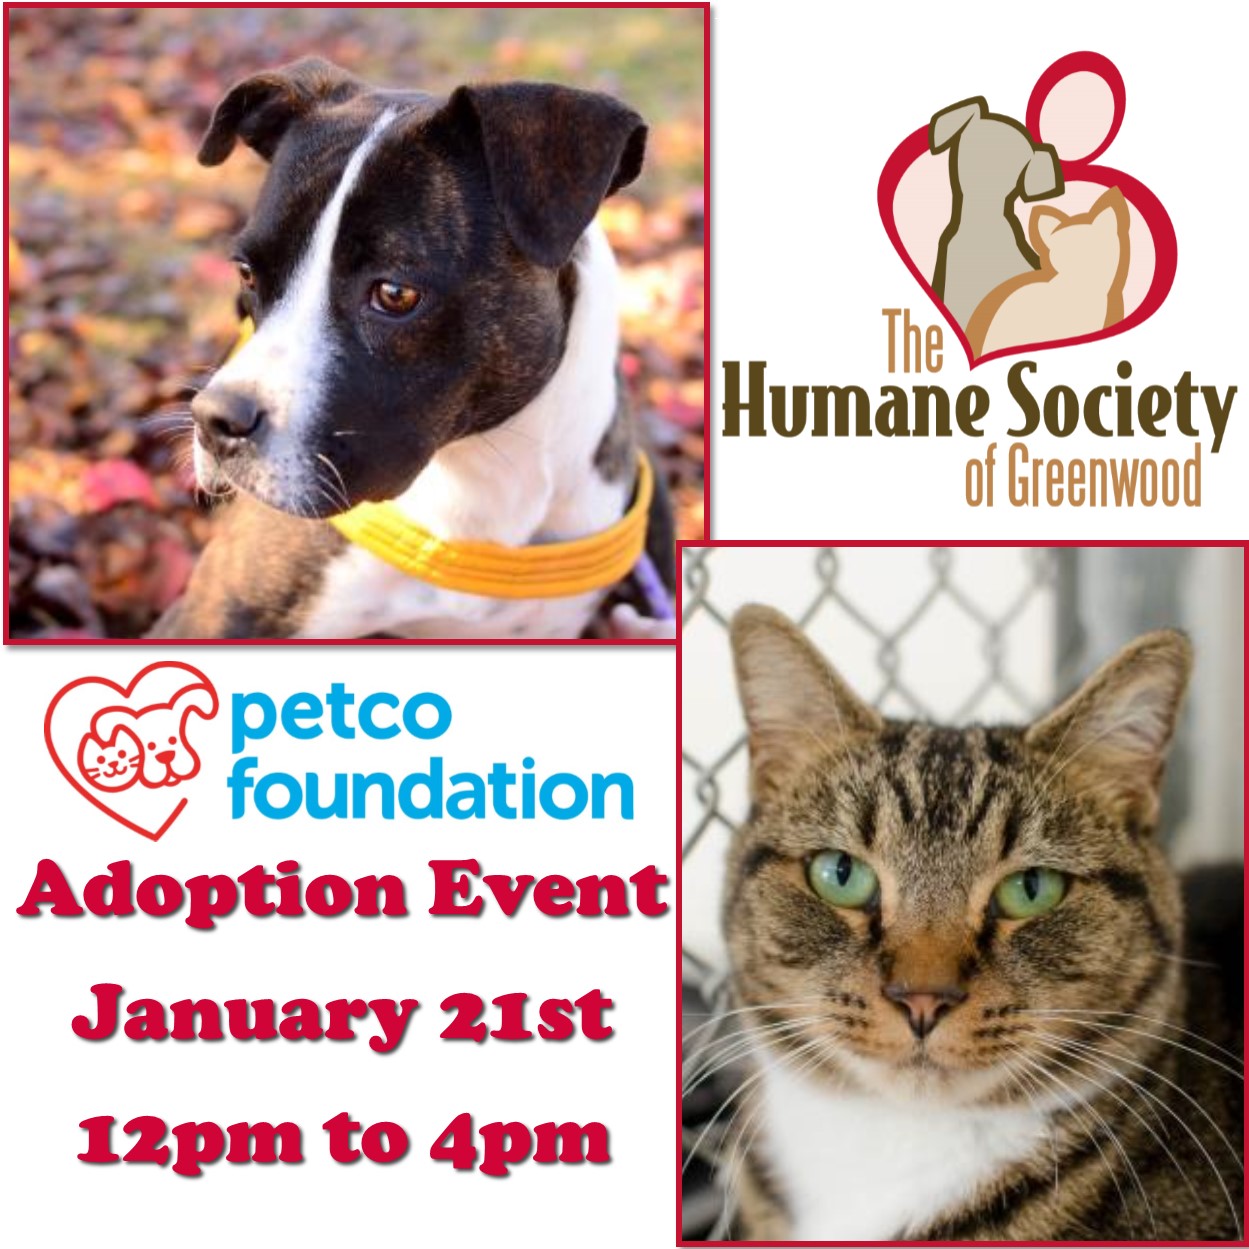 Rescheduled Petco Adoption Event Saturday January 21st From 12pm